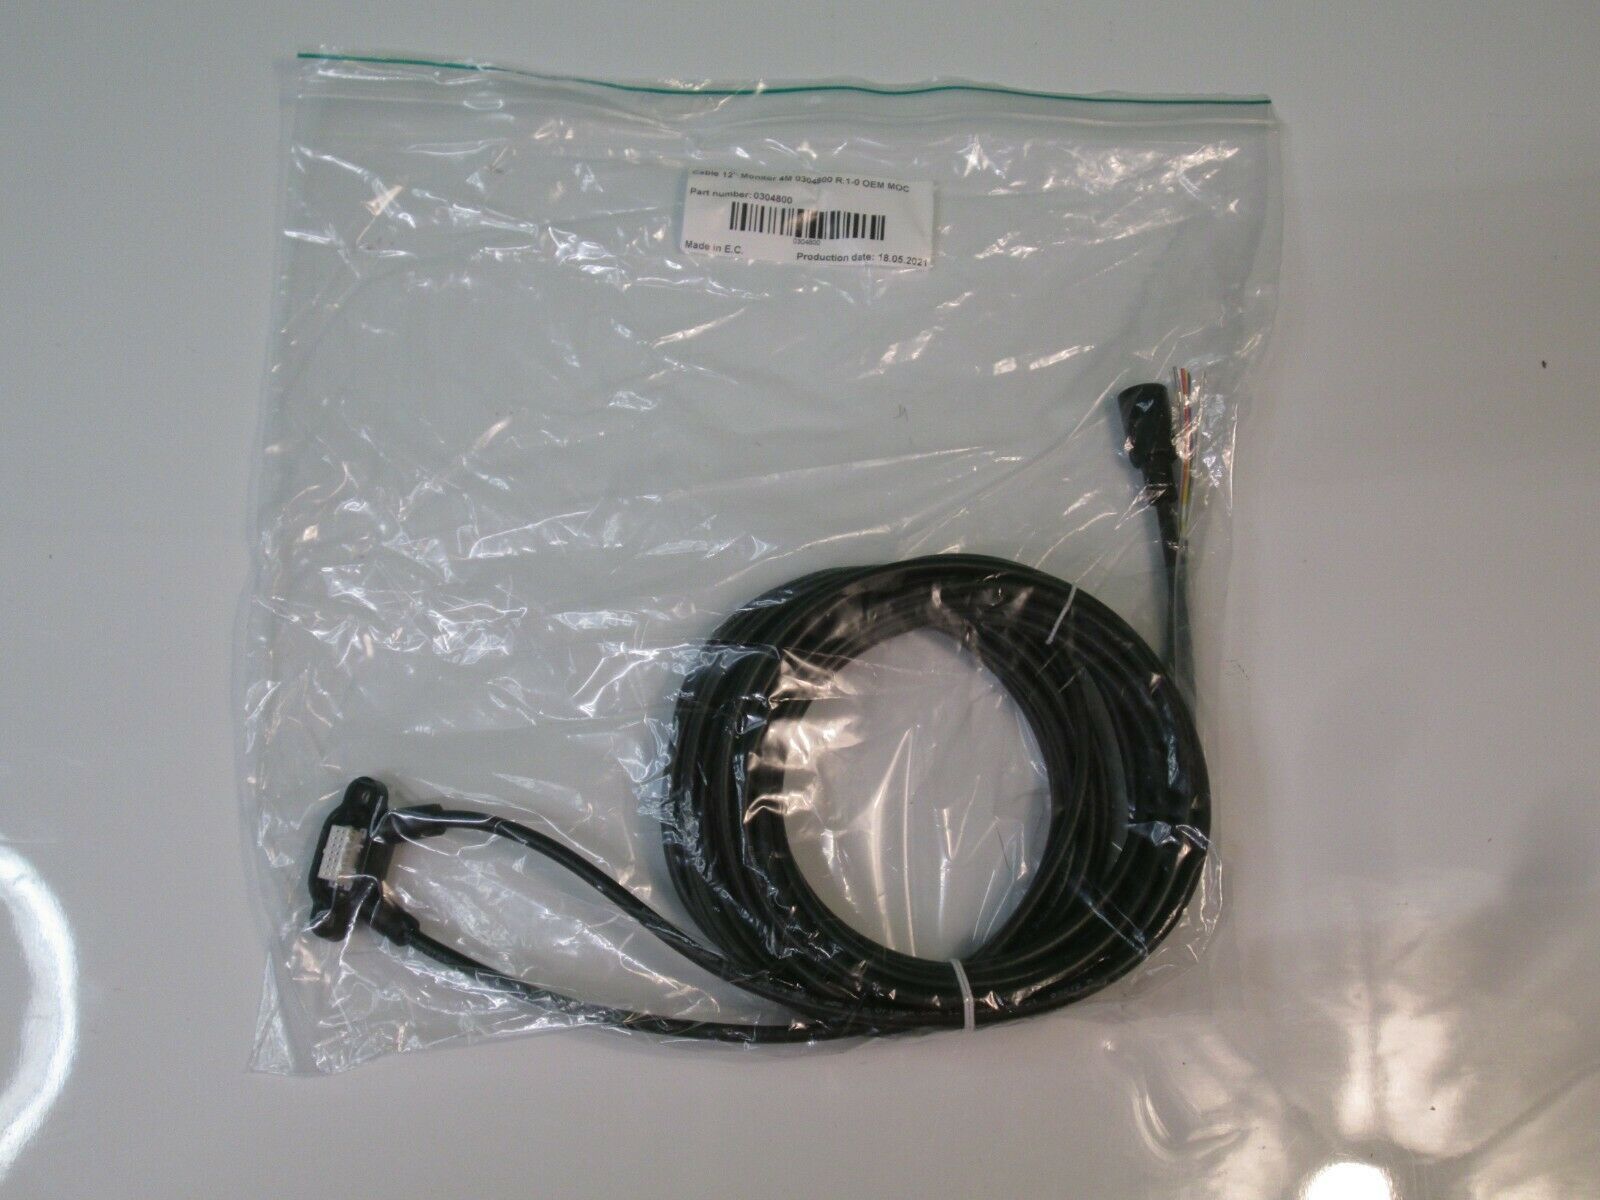 Orlaco Famos Cable 12" Monitor 4 Meter 0304800 R.1-0 Oem Moc 0304800